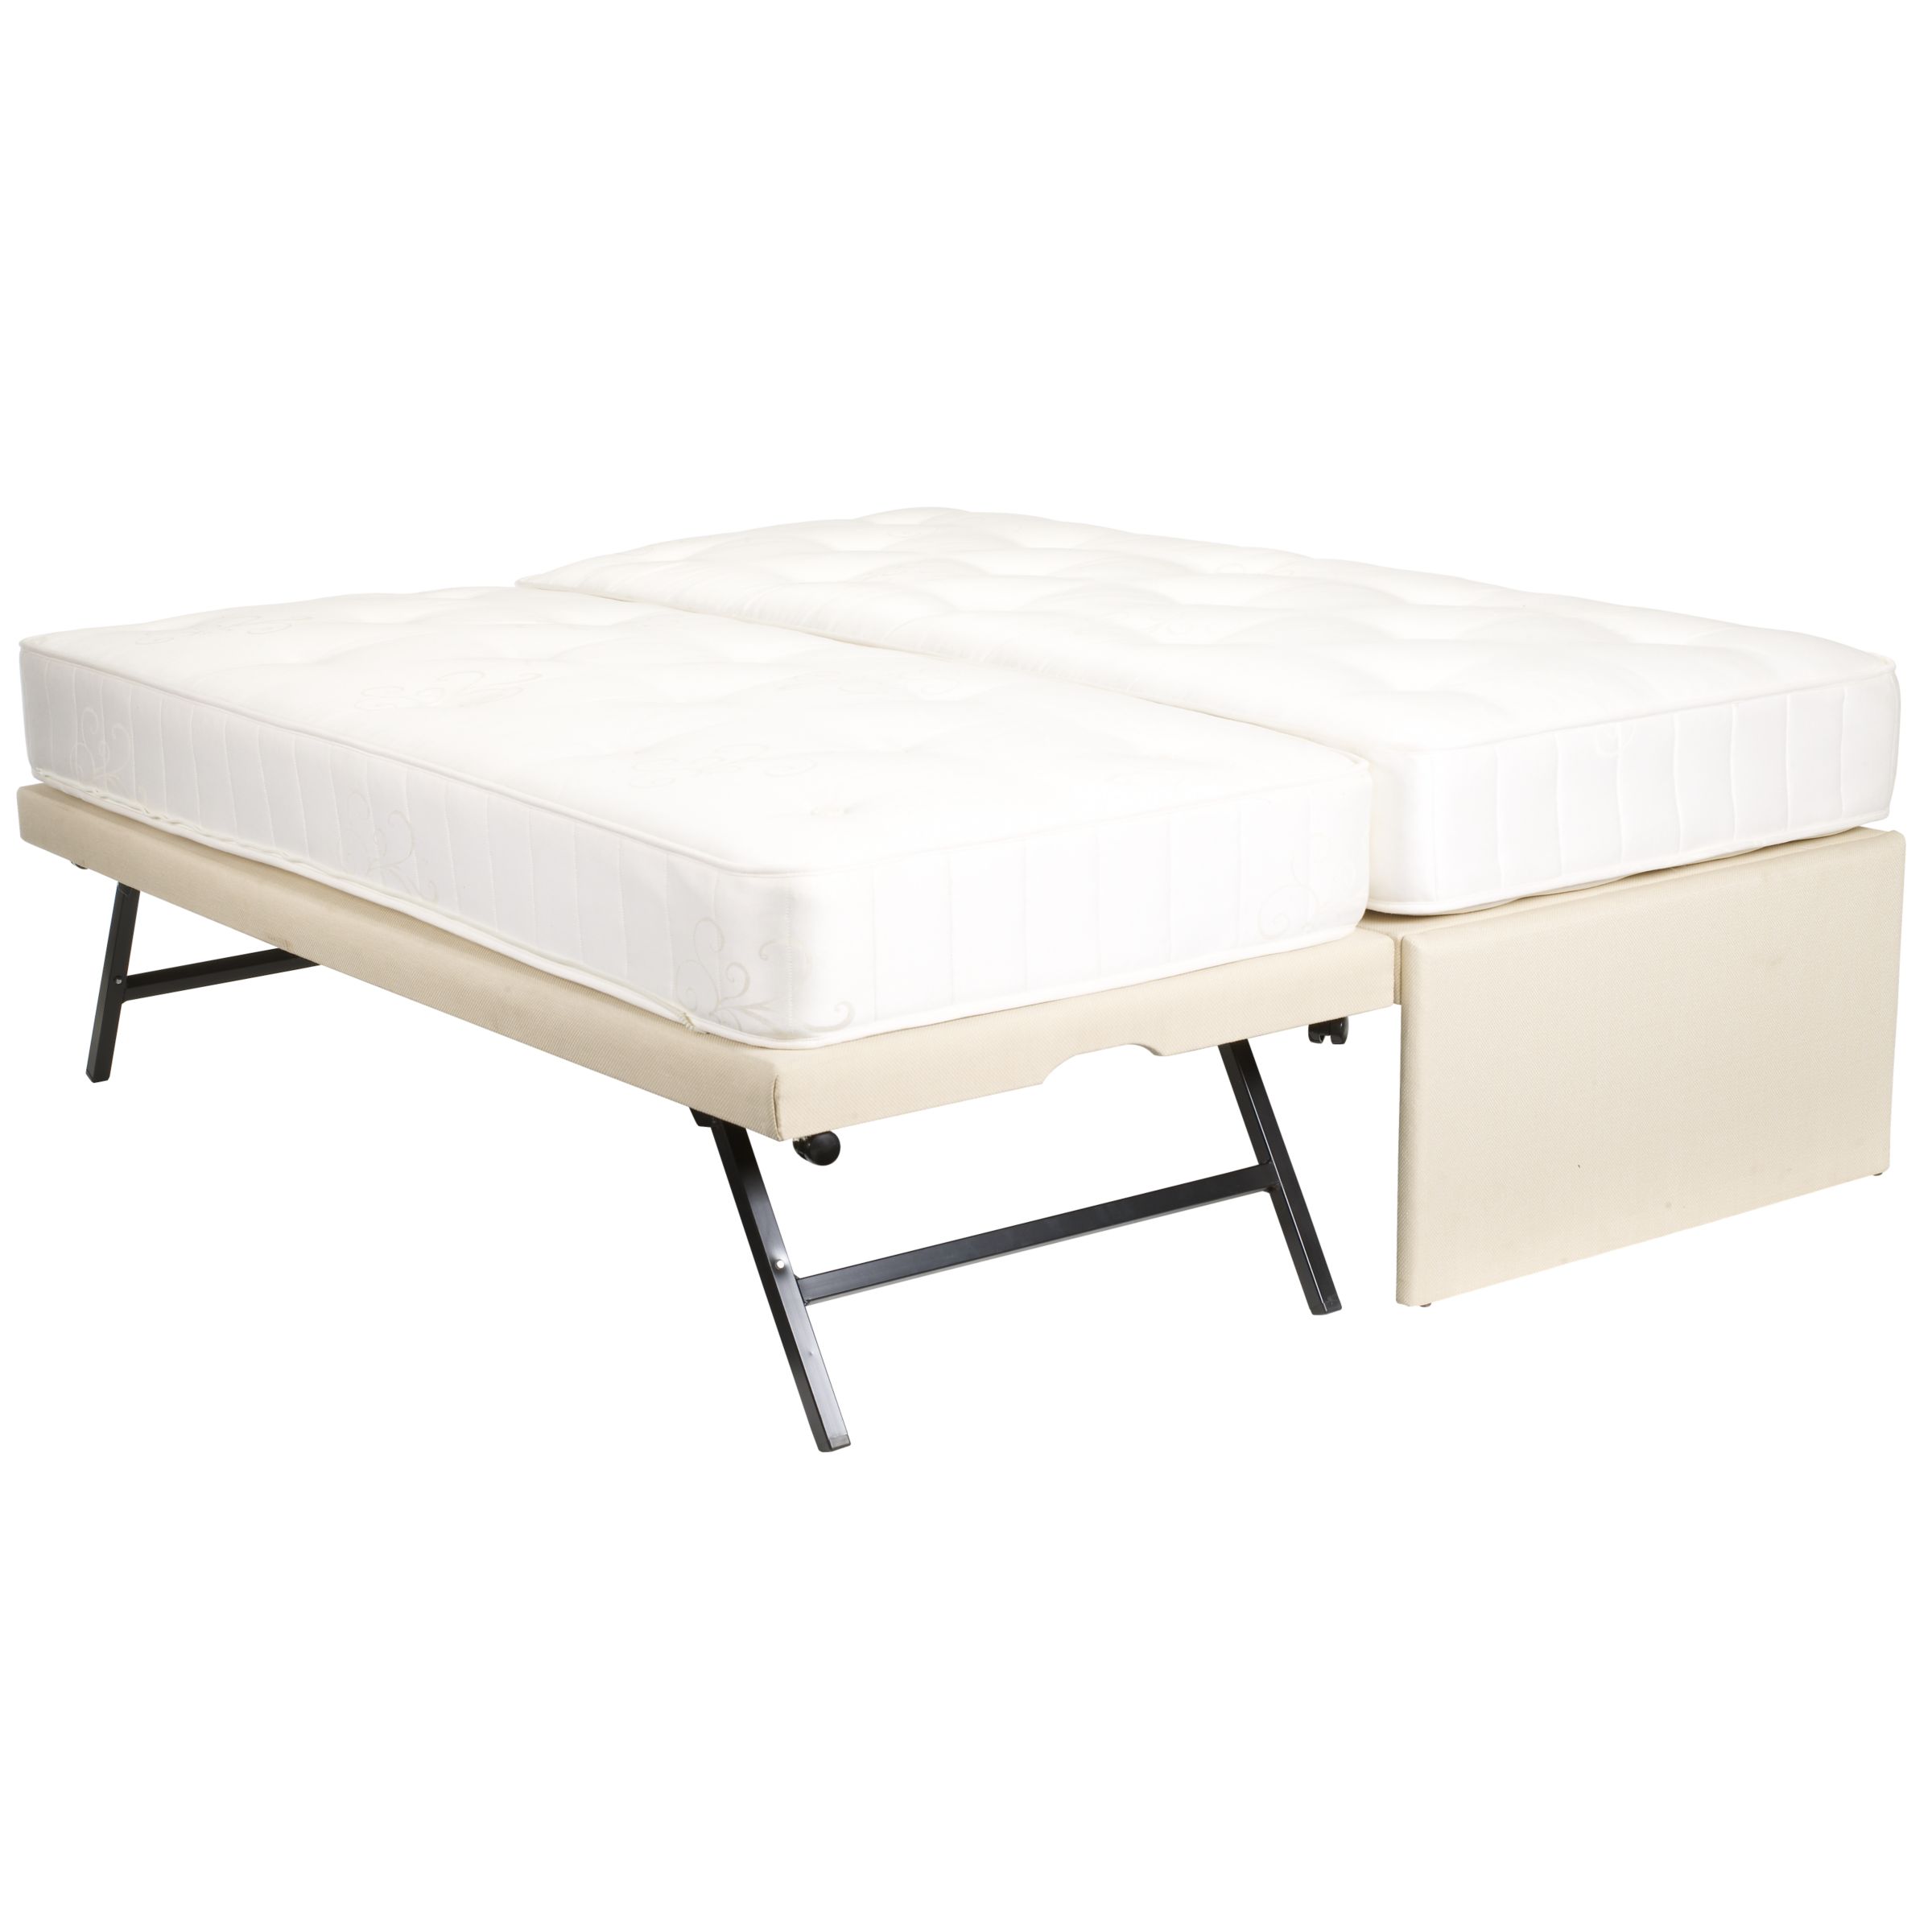 John Lewis Newton Guest Bed with Mattresses, Small Single at John Lewis